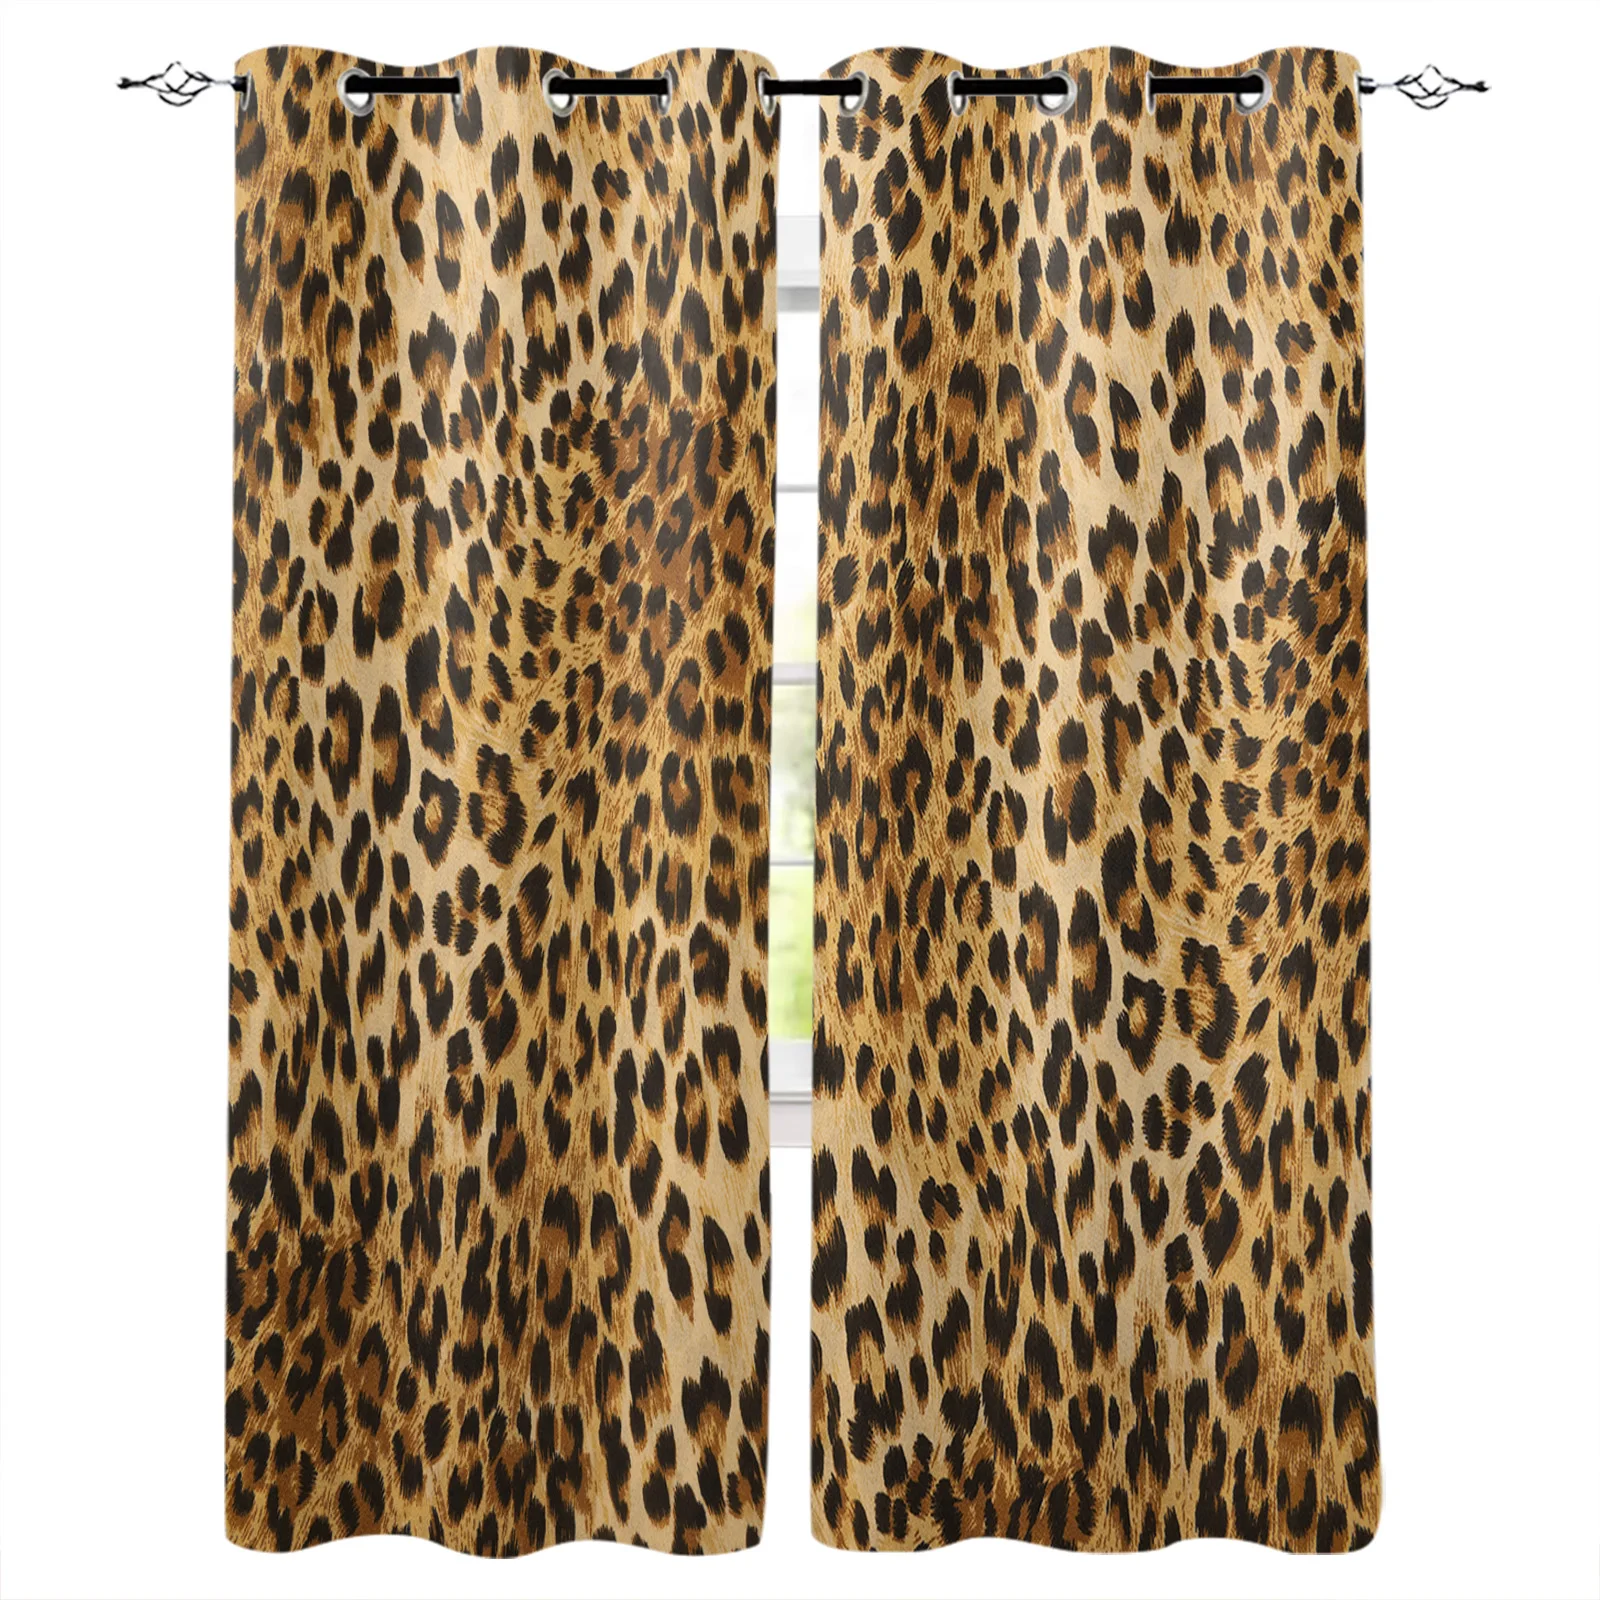 

Wild Animald Leopard Modern Blackout Curtains For Living Room Bedroom Window Treatment Blinds Drapes Kitchen Curtains